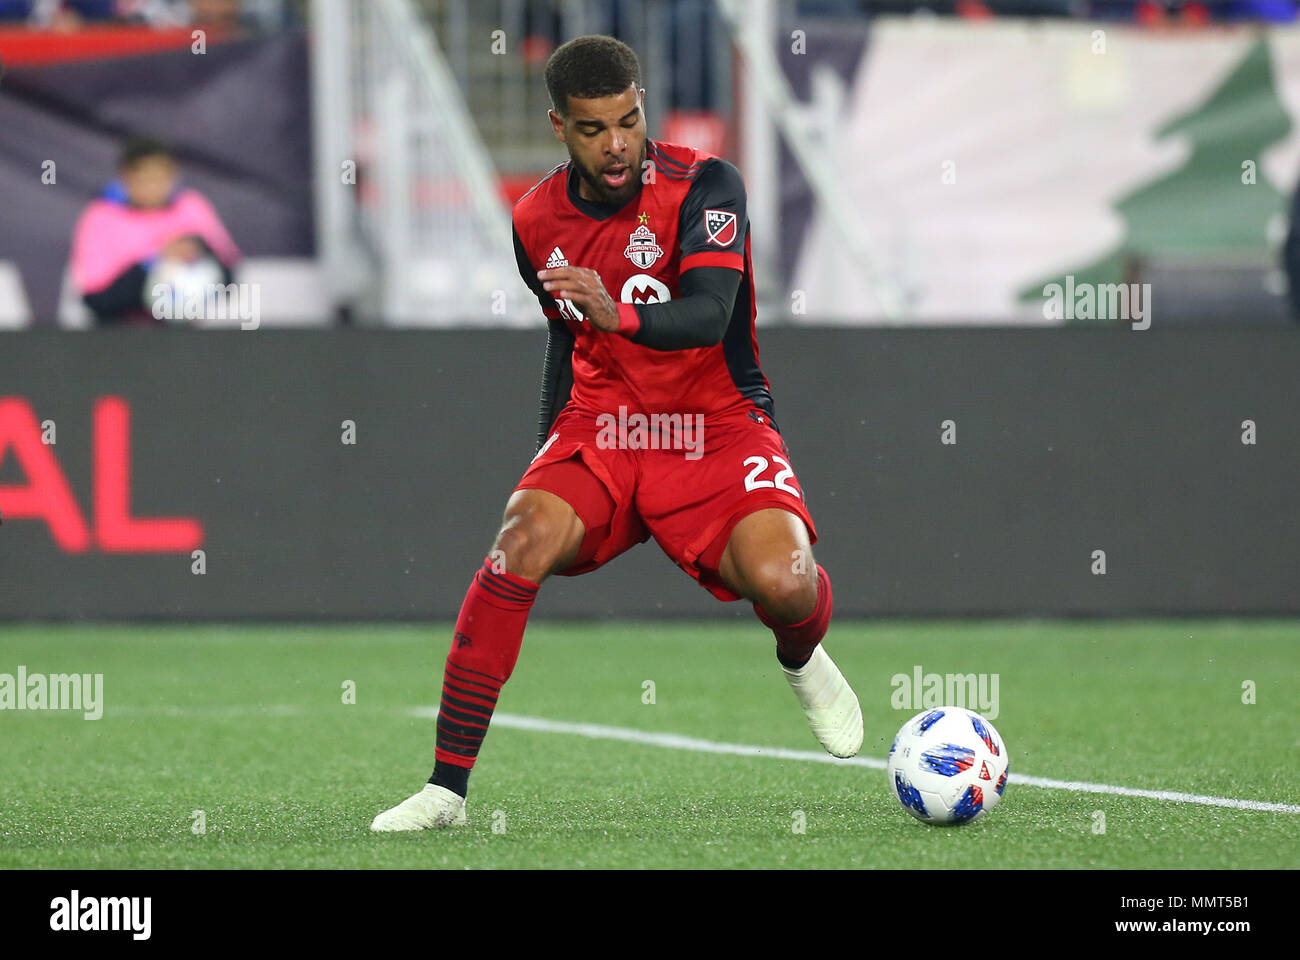 Gillette Stadium. 12th May, 2018. MA, USA; Toronto FC forward Jordan Hamilton (22) in action during an MLS match between Toronto FC and England Revolution at Gillette Stadium. New won